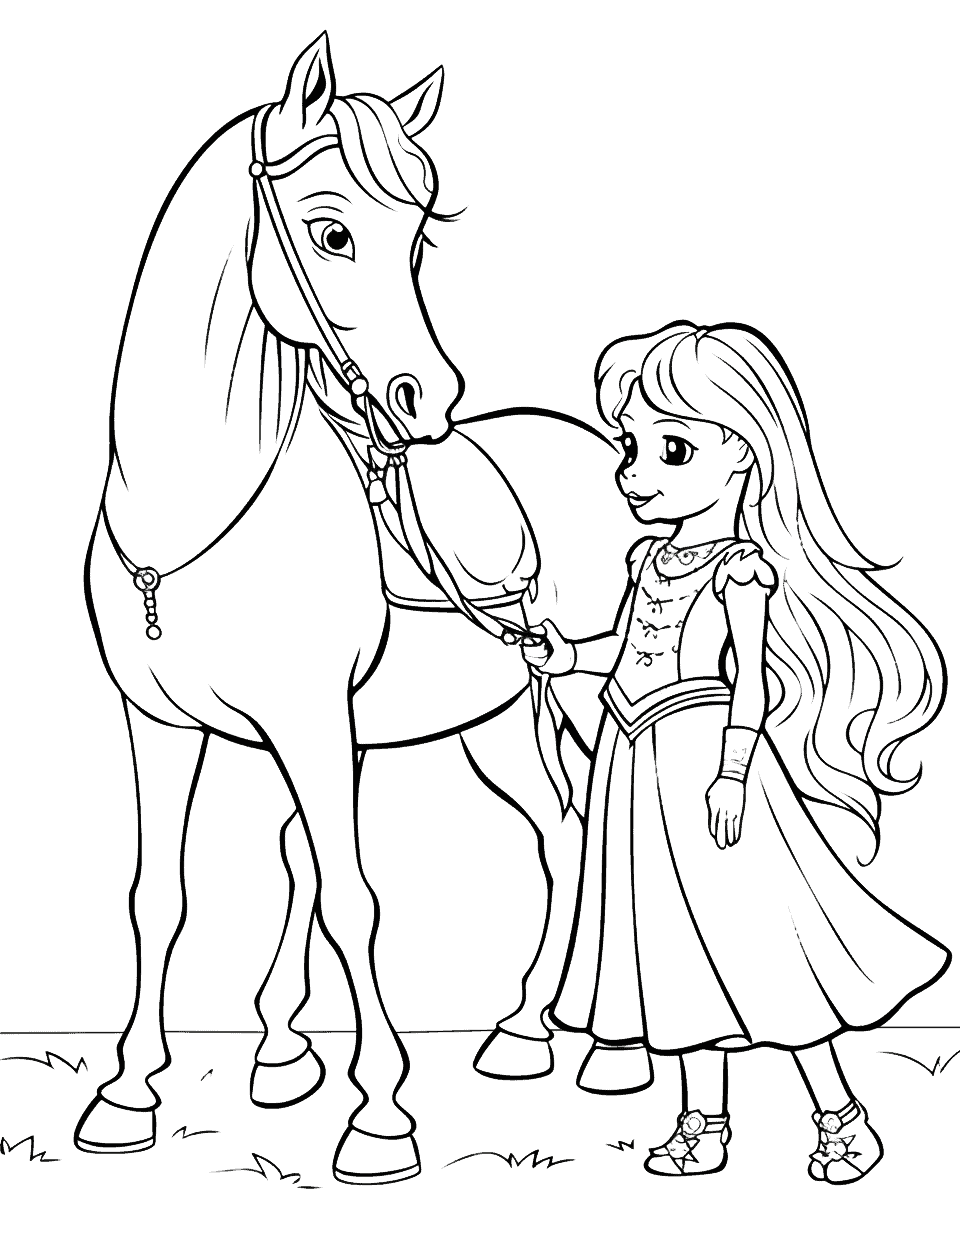 Pretty Princess and Her Pony Coloring Page - A beautiful princess grooming her favorite pony in the royal stables.